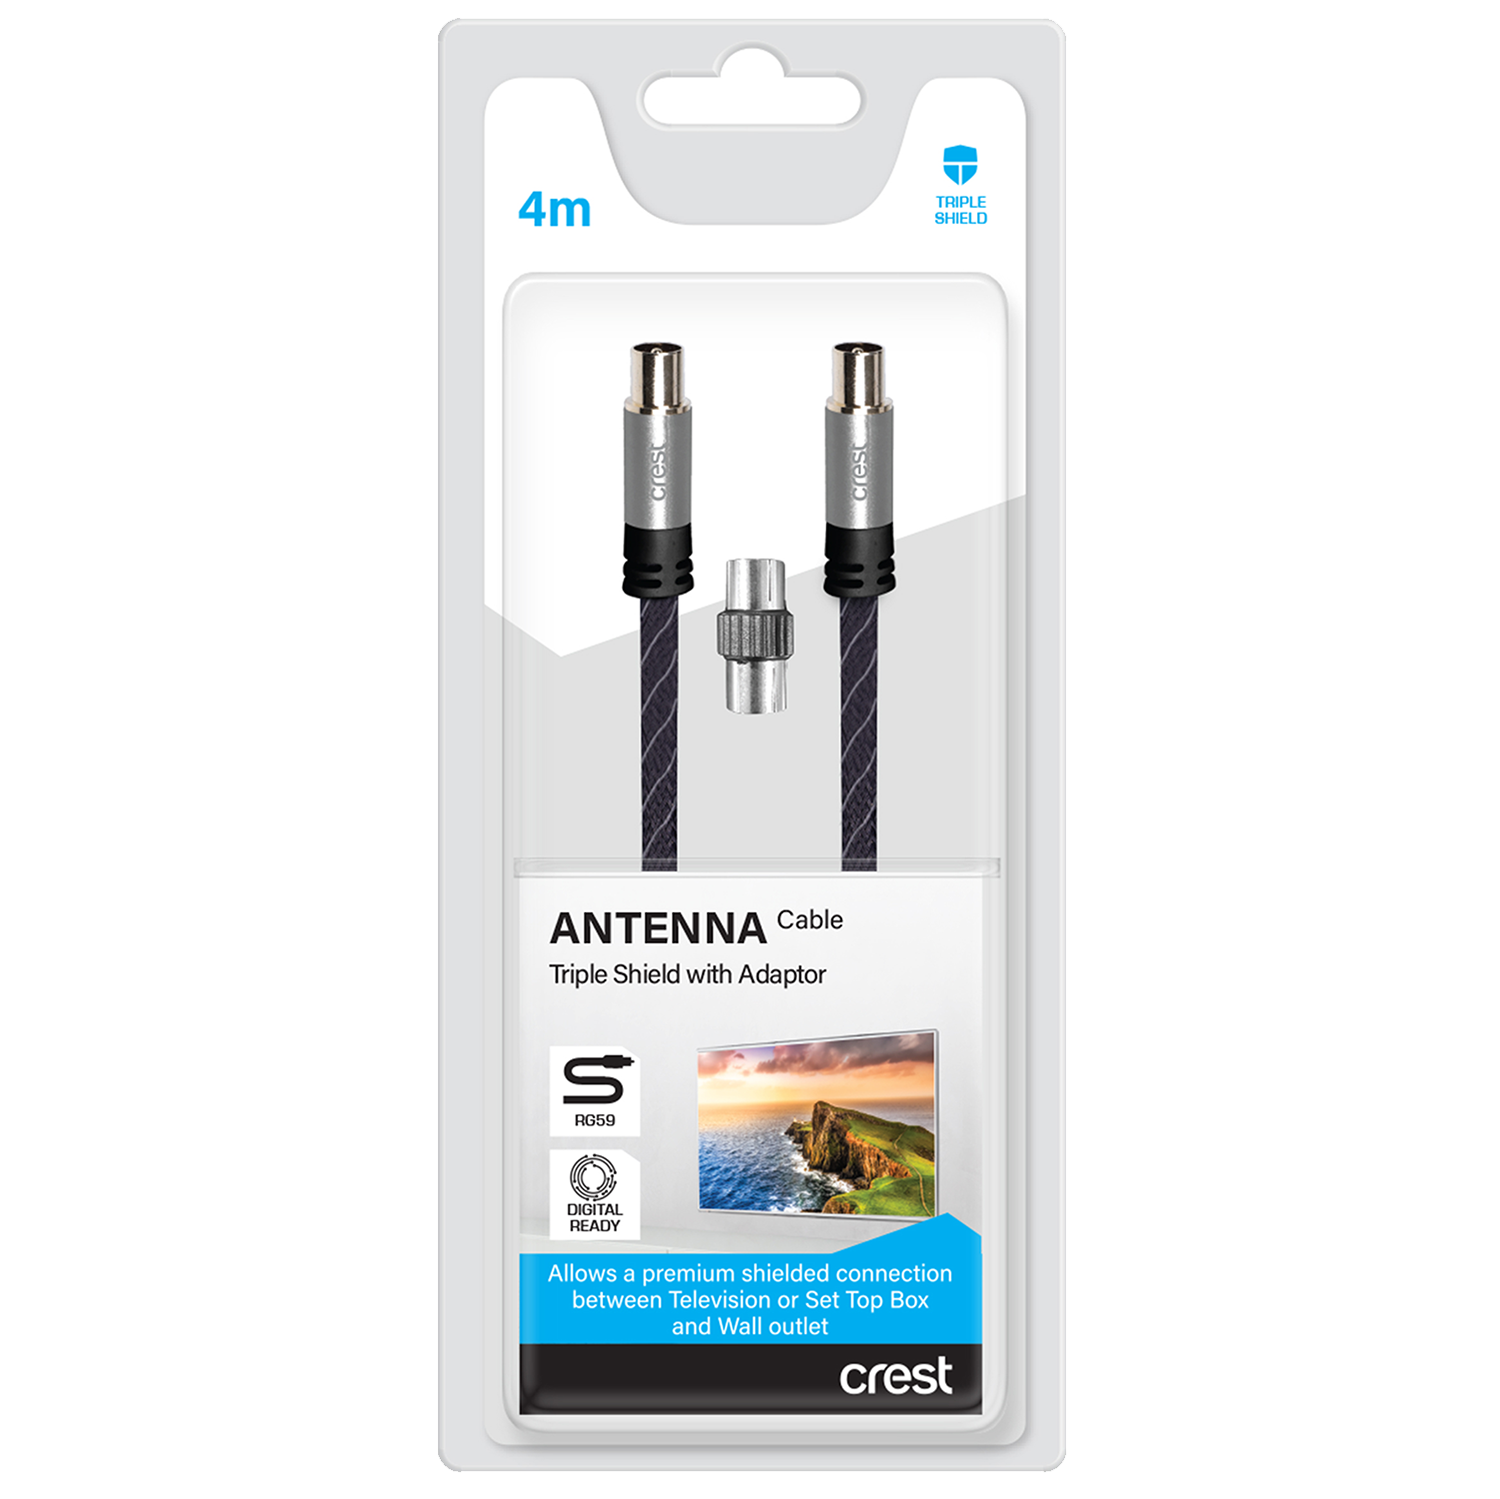 Triple Shield TV Antenna Cable 4M With Adaptor